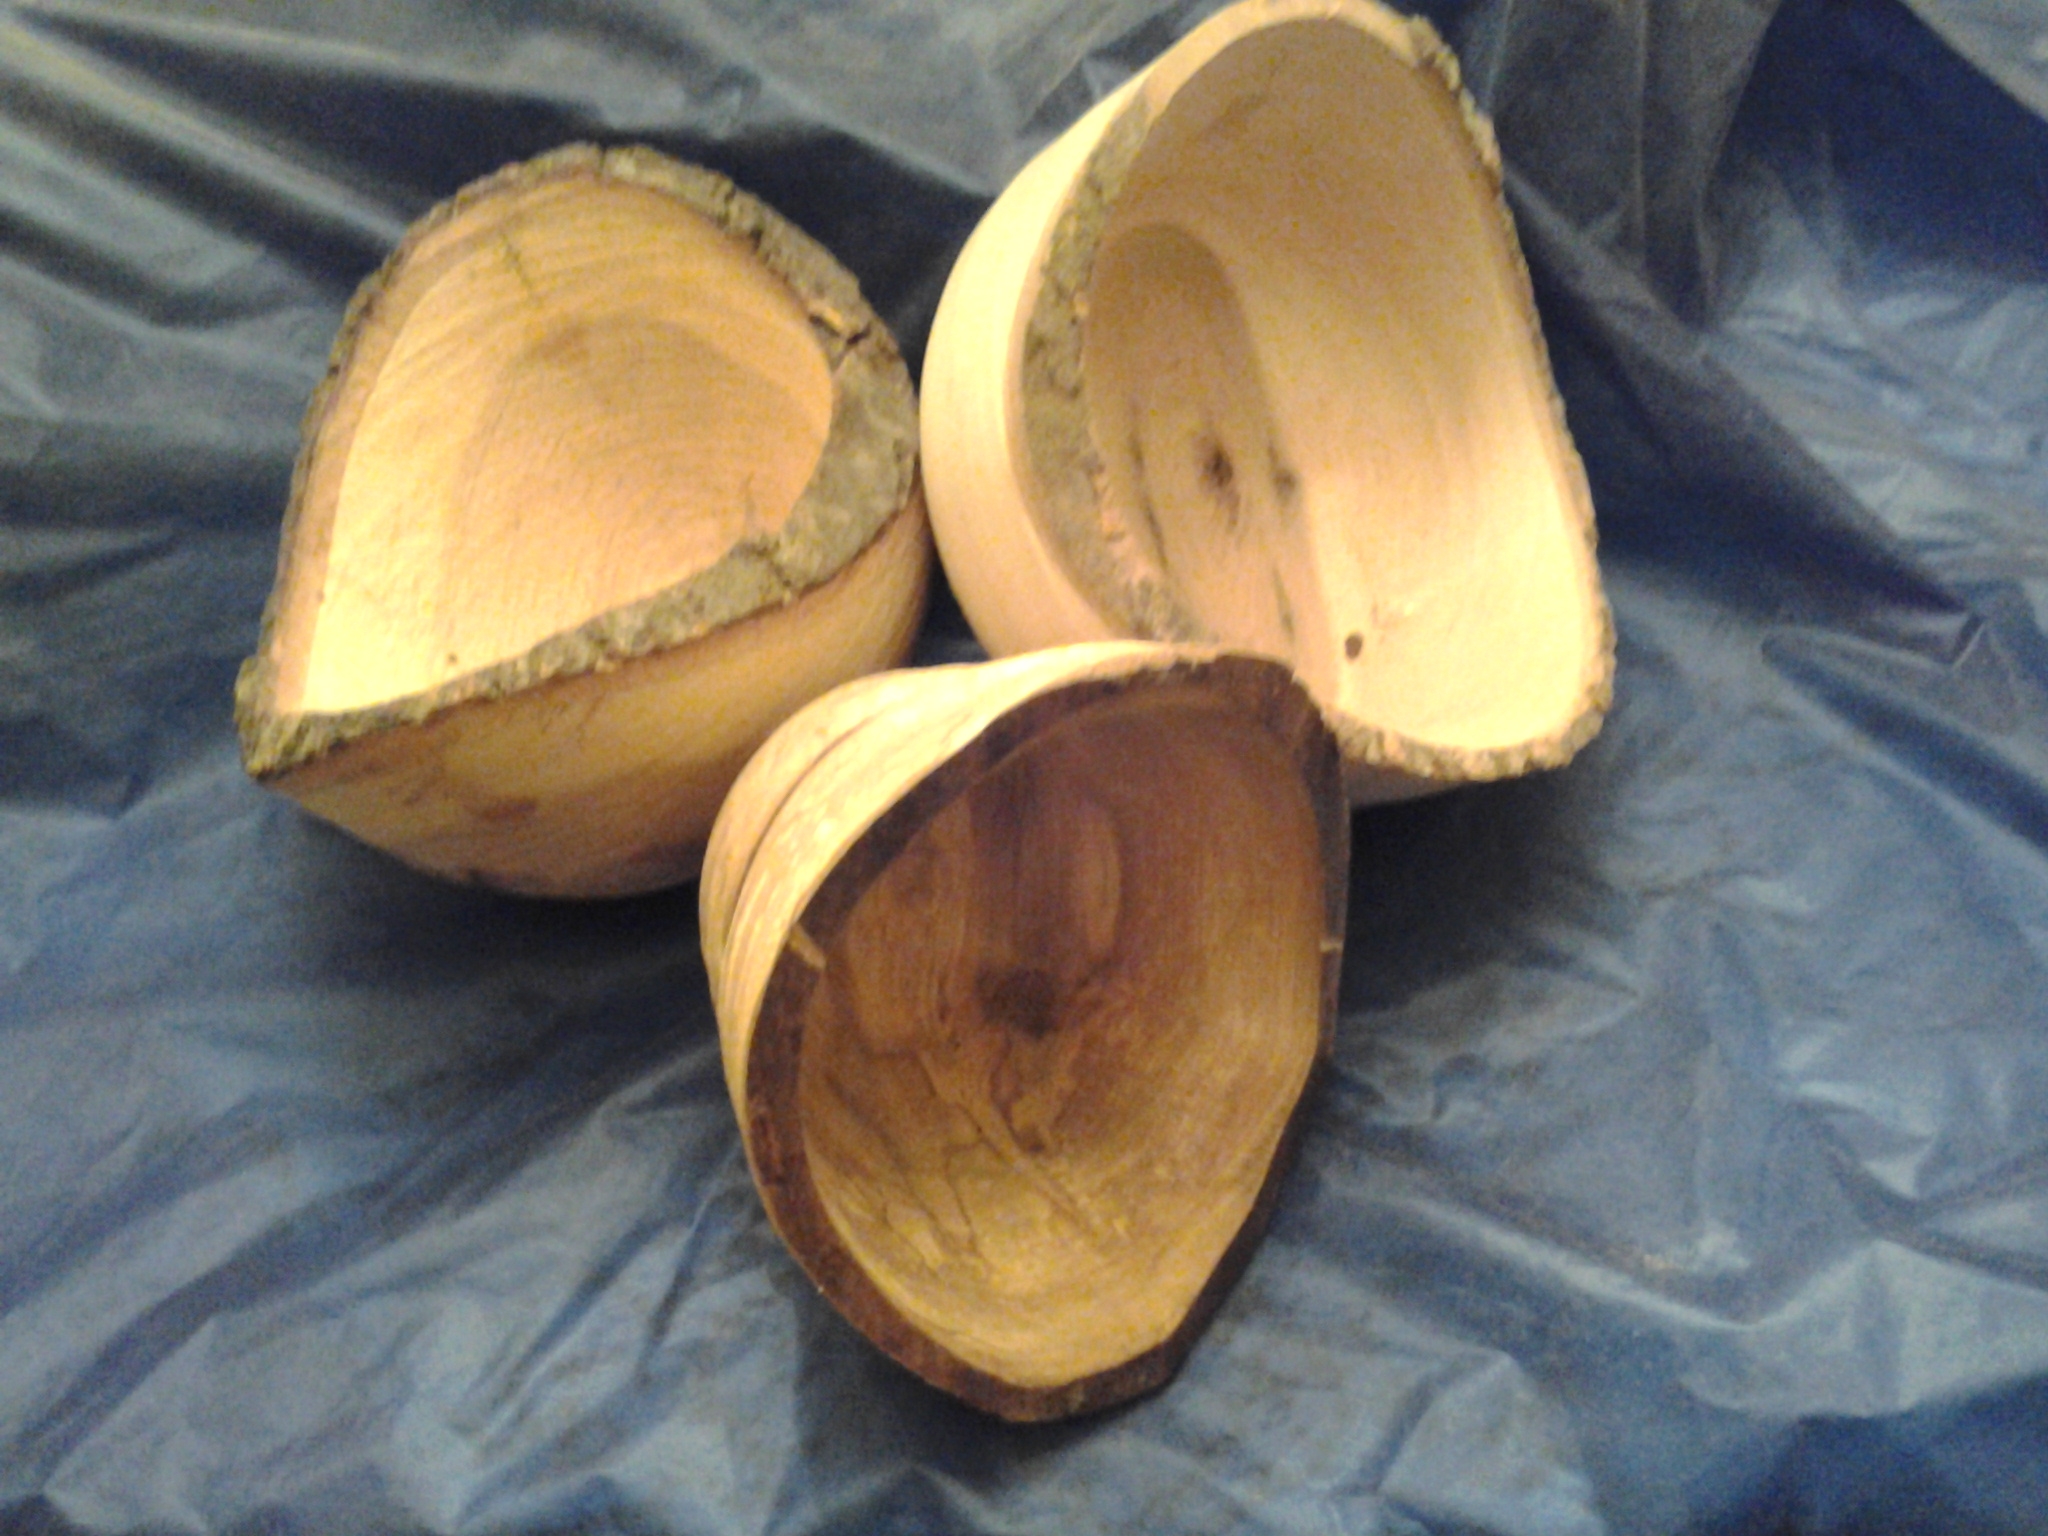 Three wooden bowls with bark on the edge sit on a blue background.